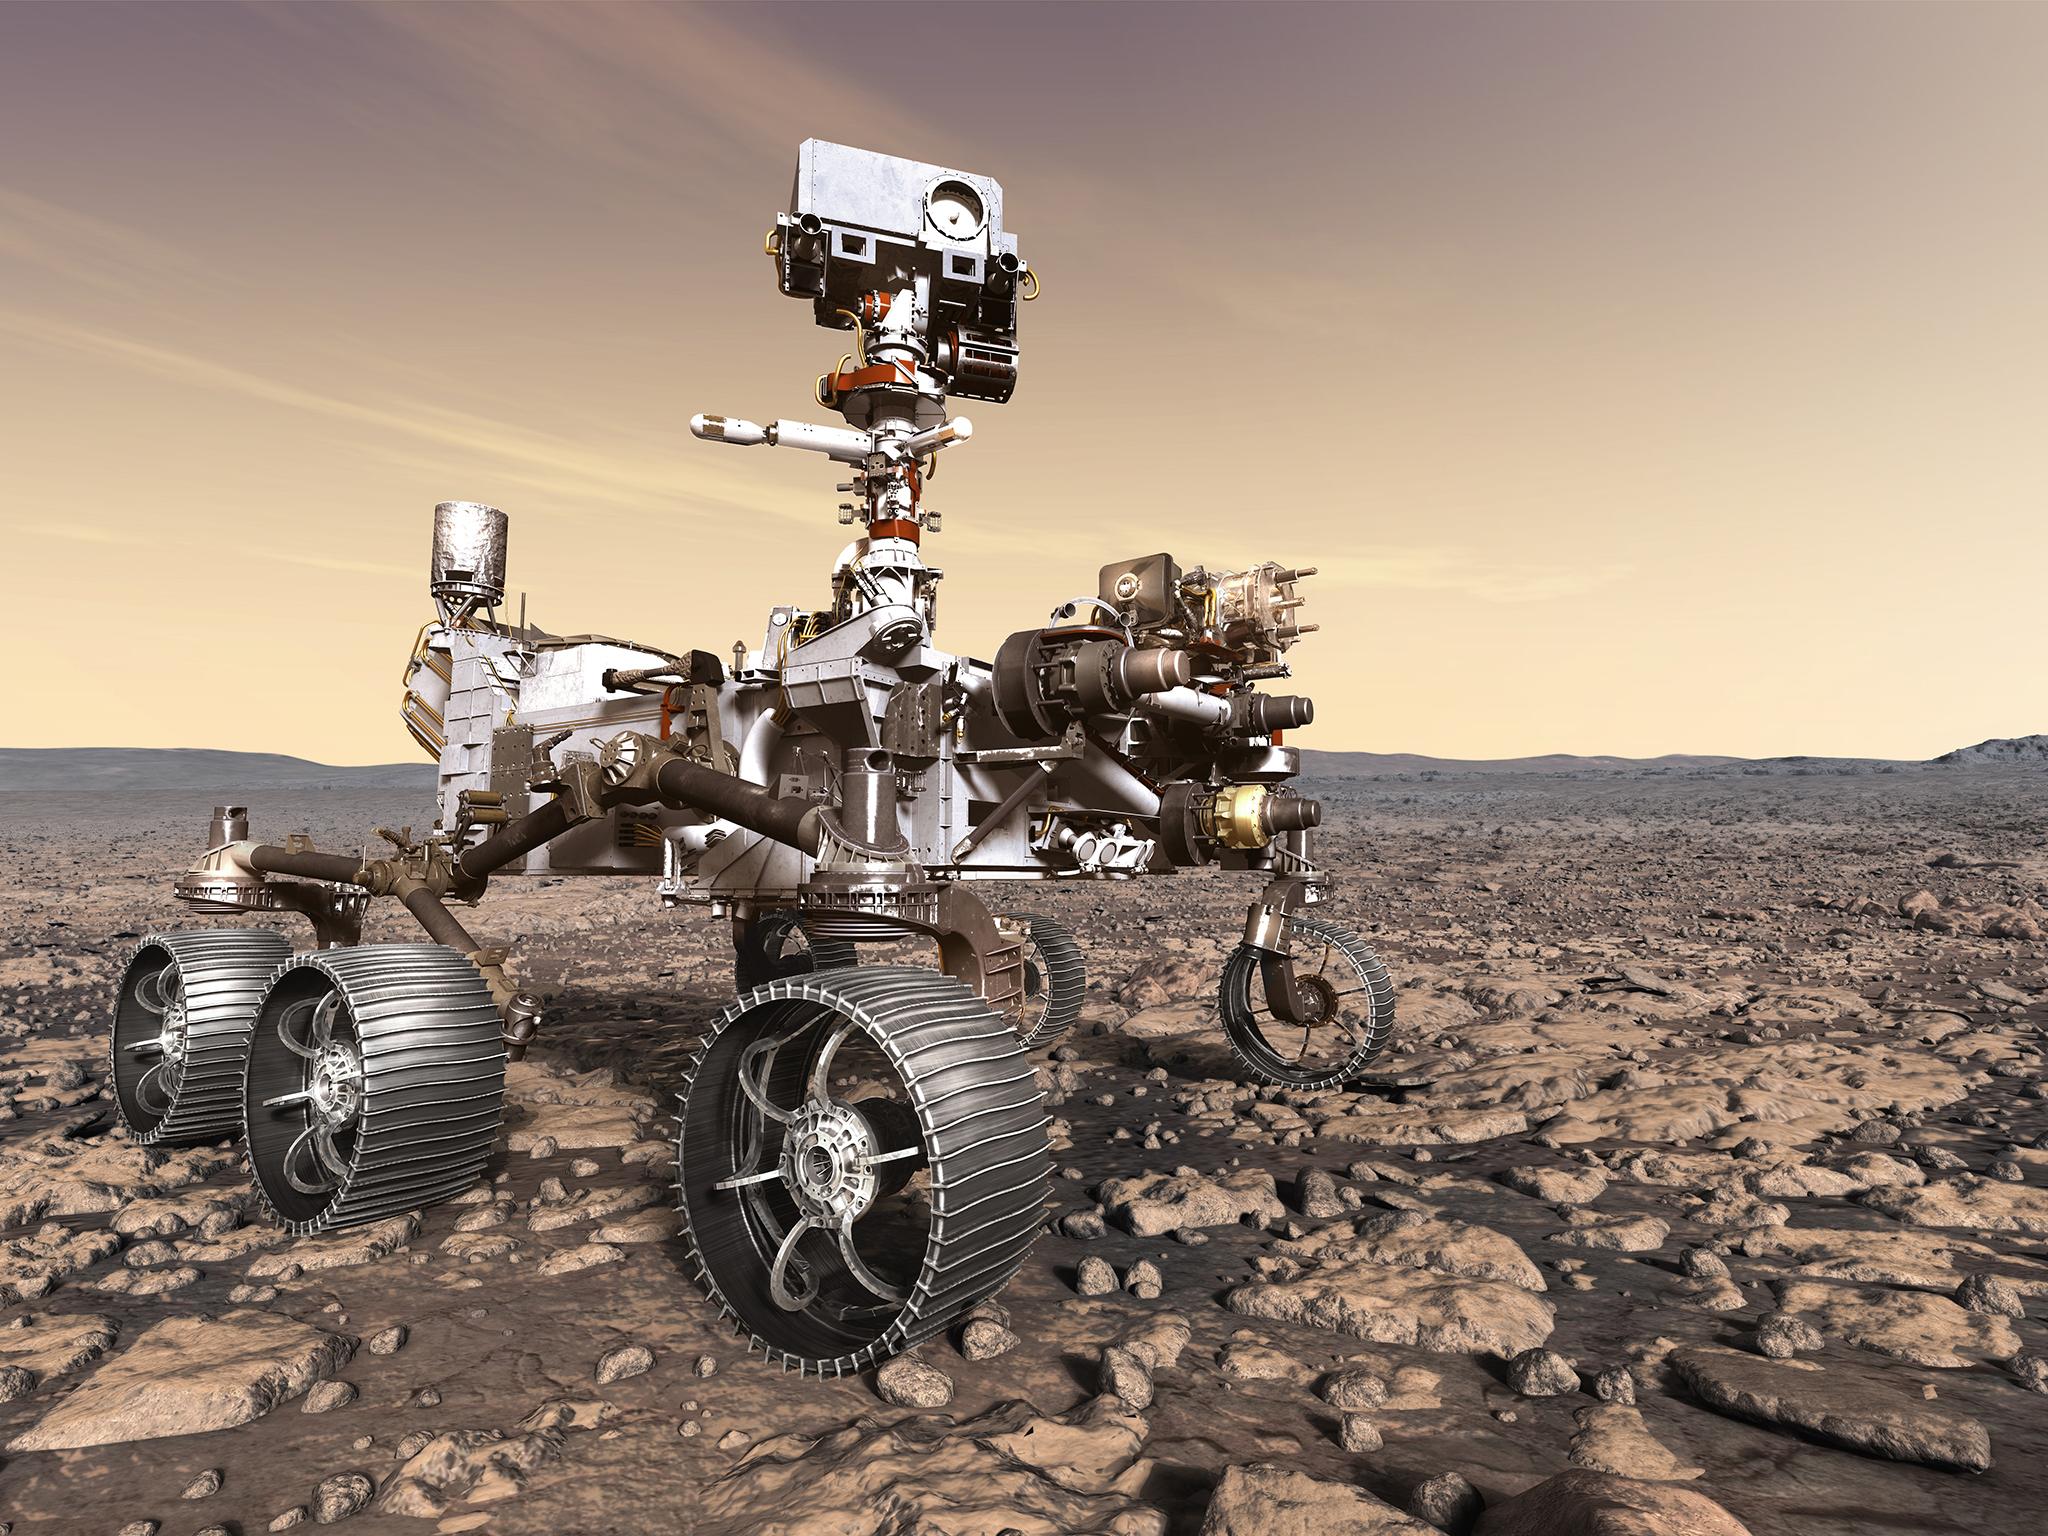 NASA Scientist Responds to Claims That Curiosity Rover Pics Show